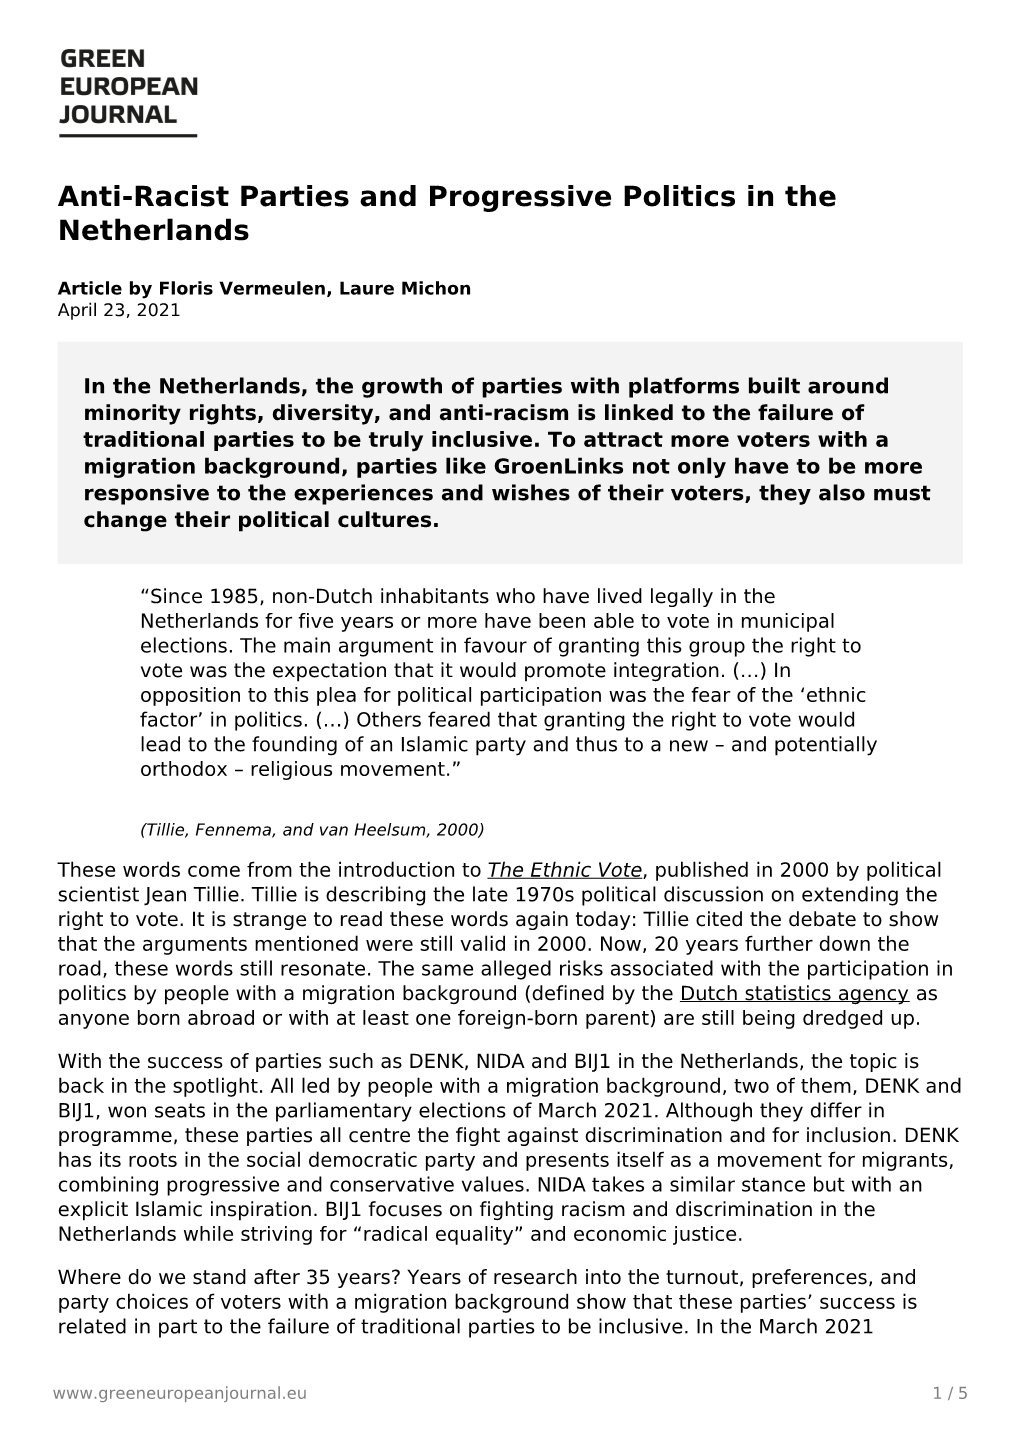 Anti-Racist Parties and Progressive Politics in the Netherlands